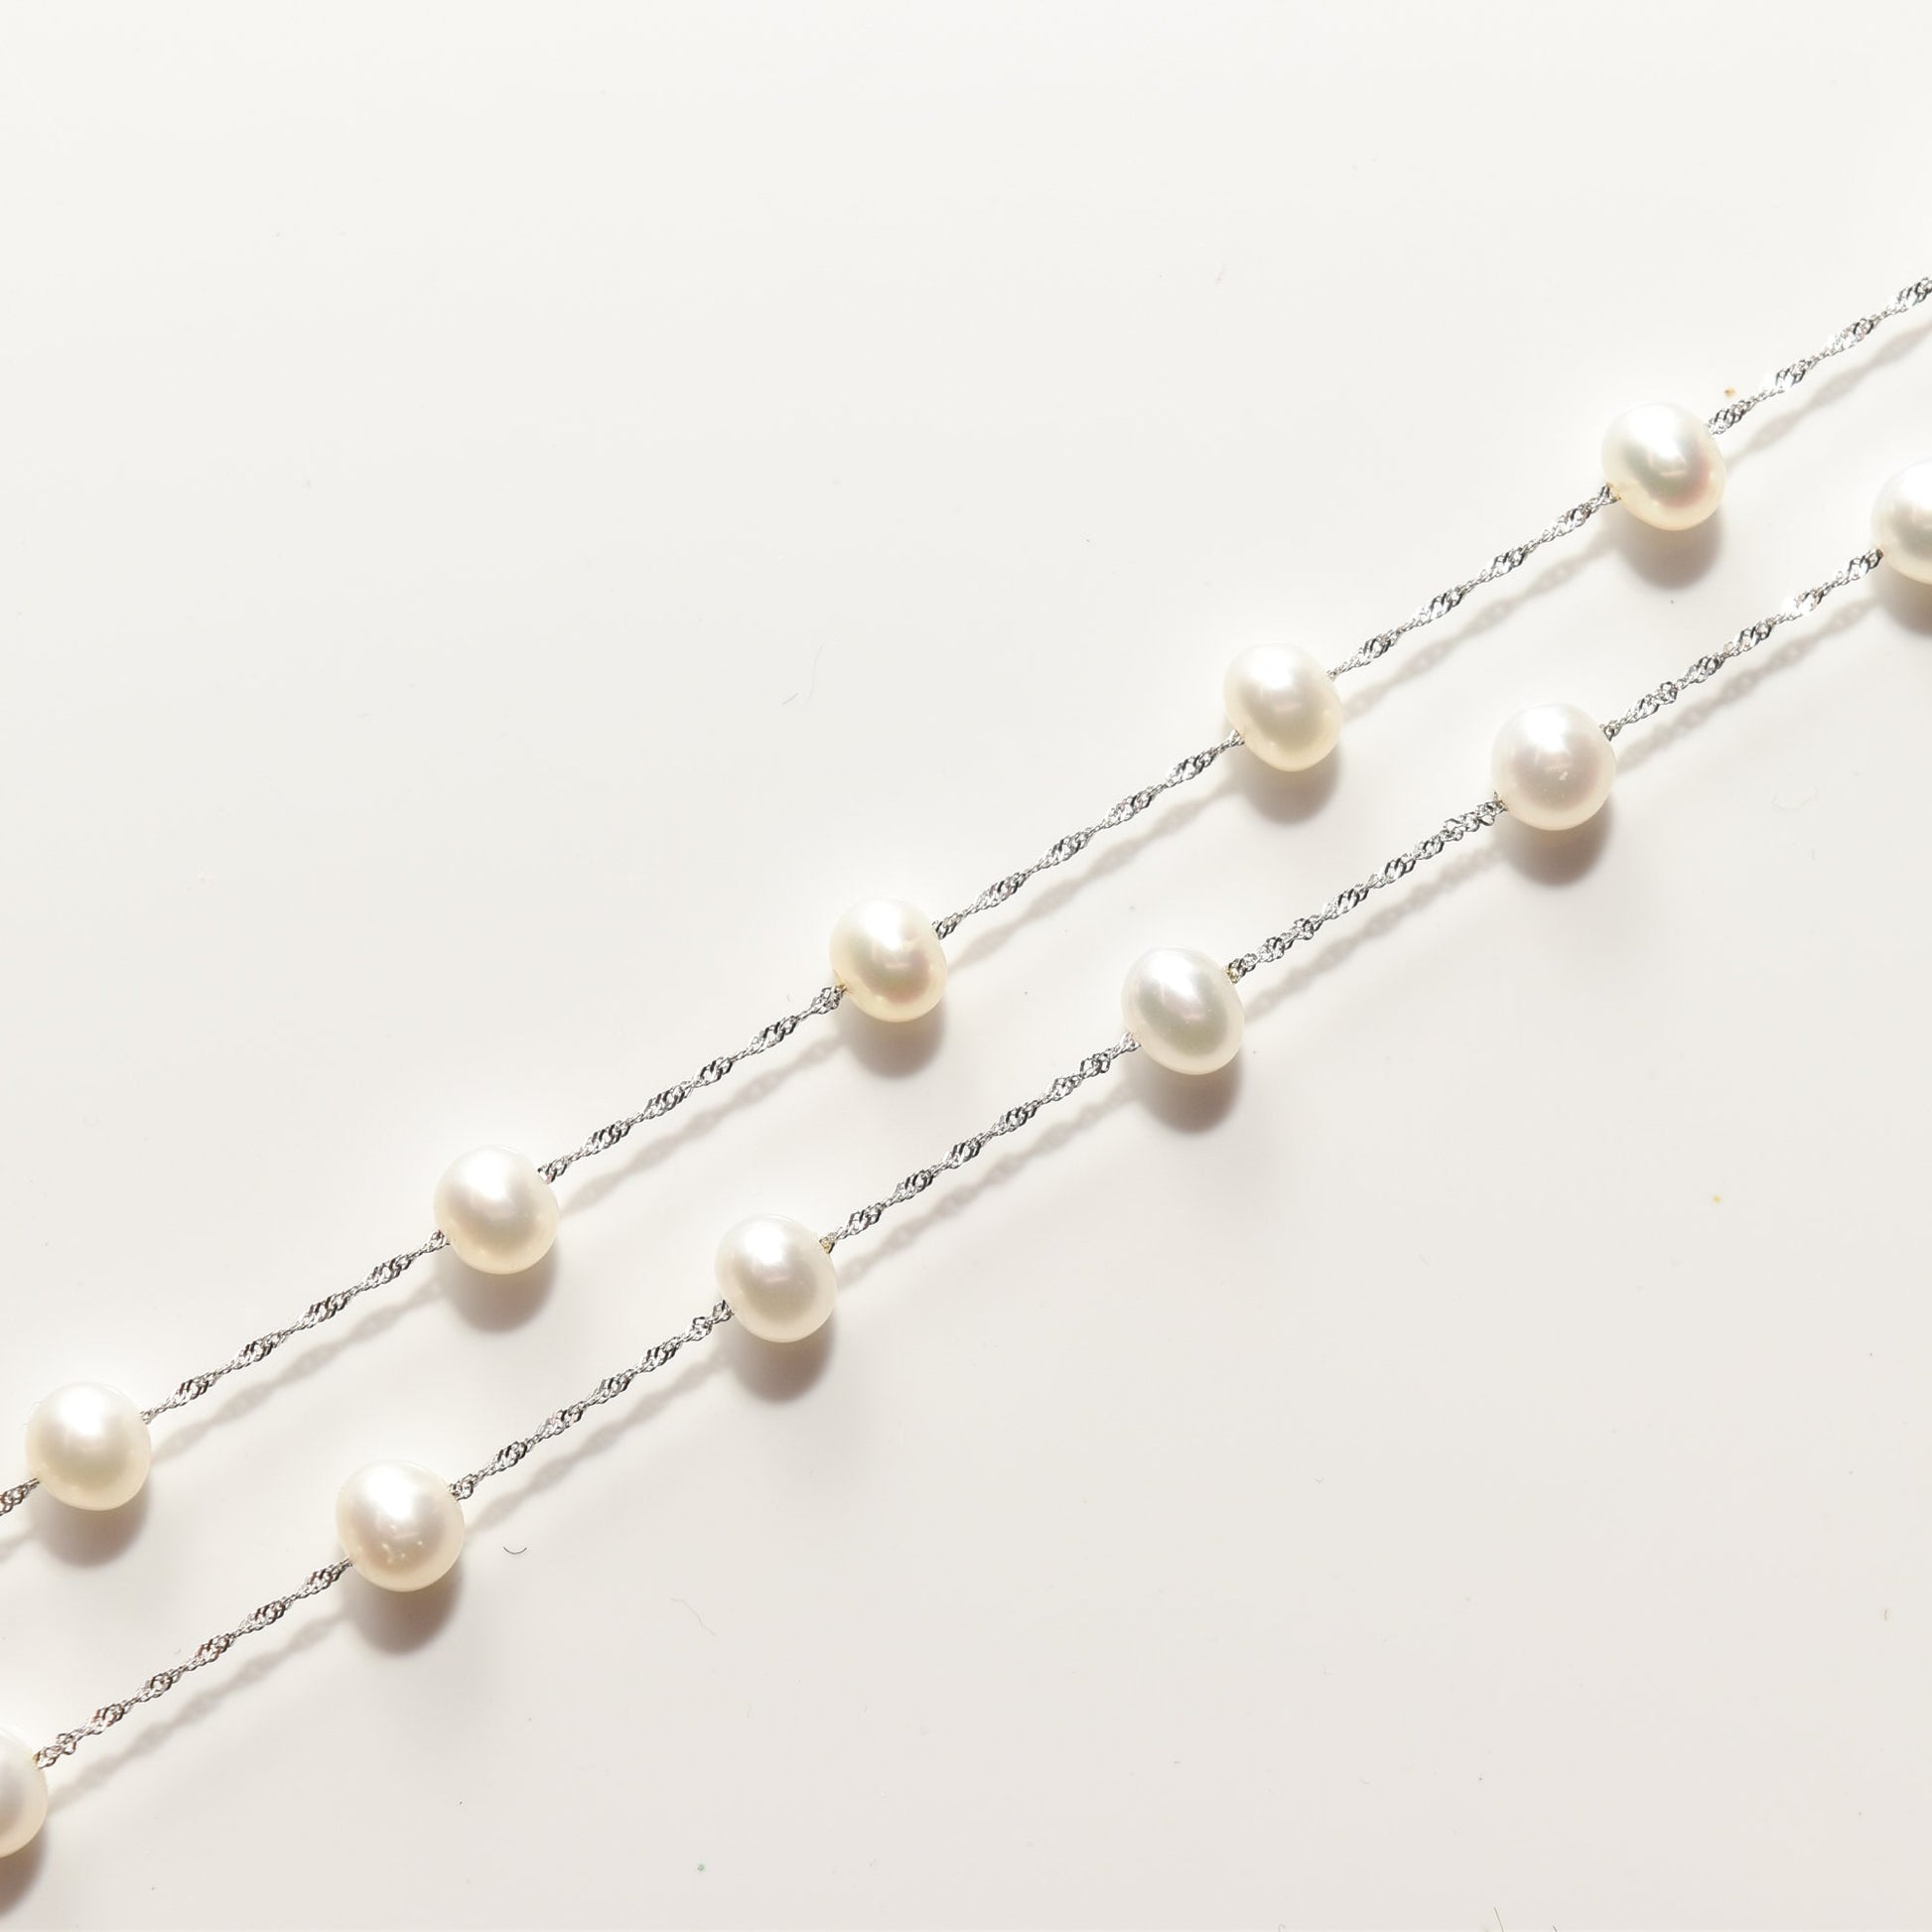 Elegant white pearl choker necklace in 14K white gold with pearls evenly spaced along a 17.75 inch chain on a white background.